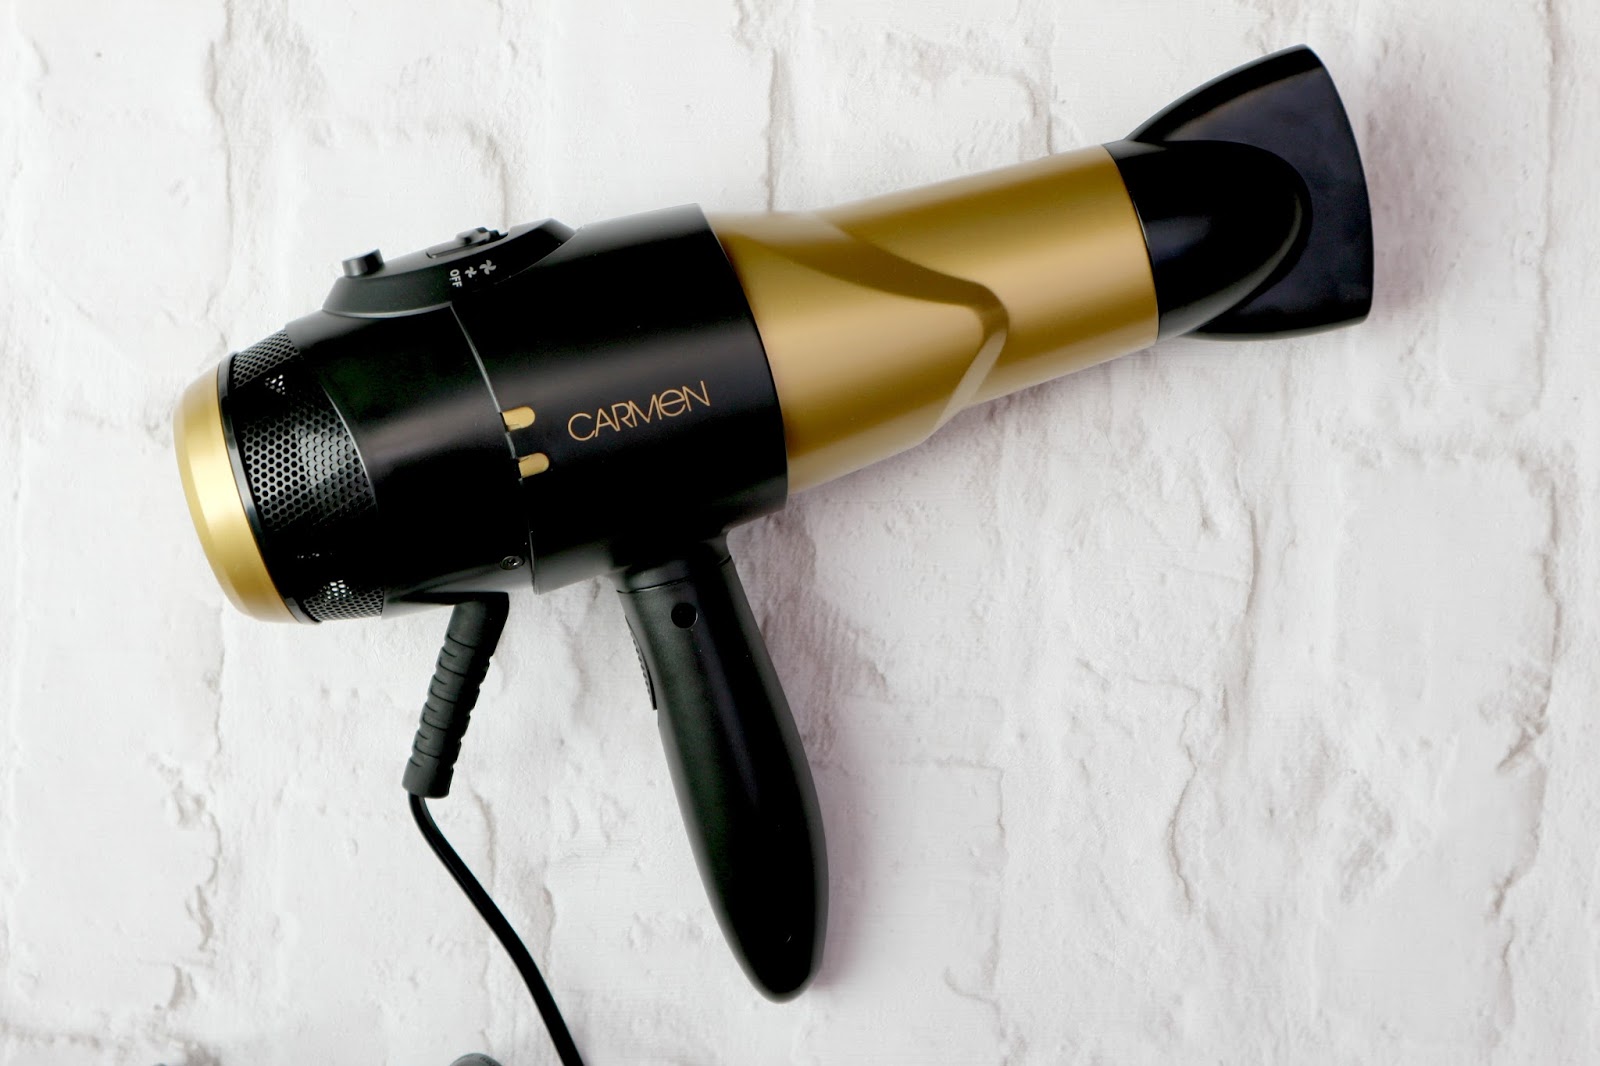 Hands-Free Hair Drying With Carmen | Ellis Tuesday